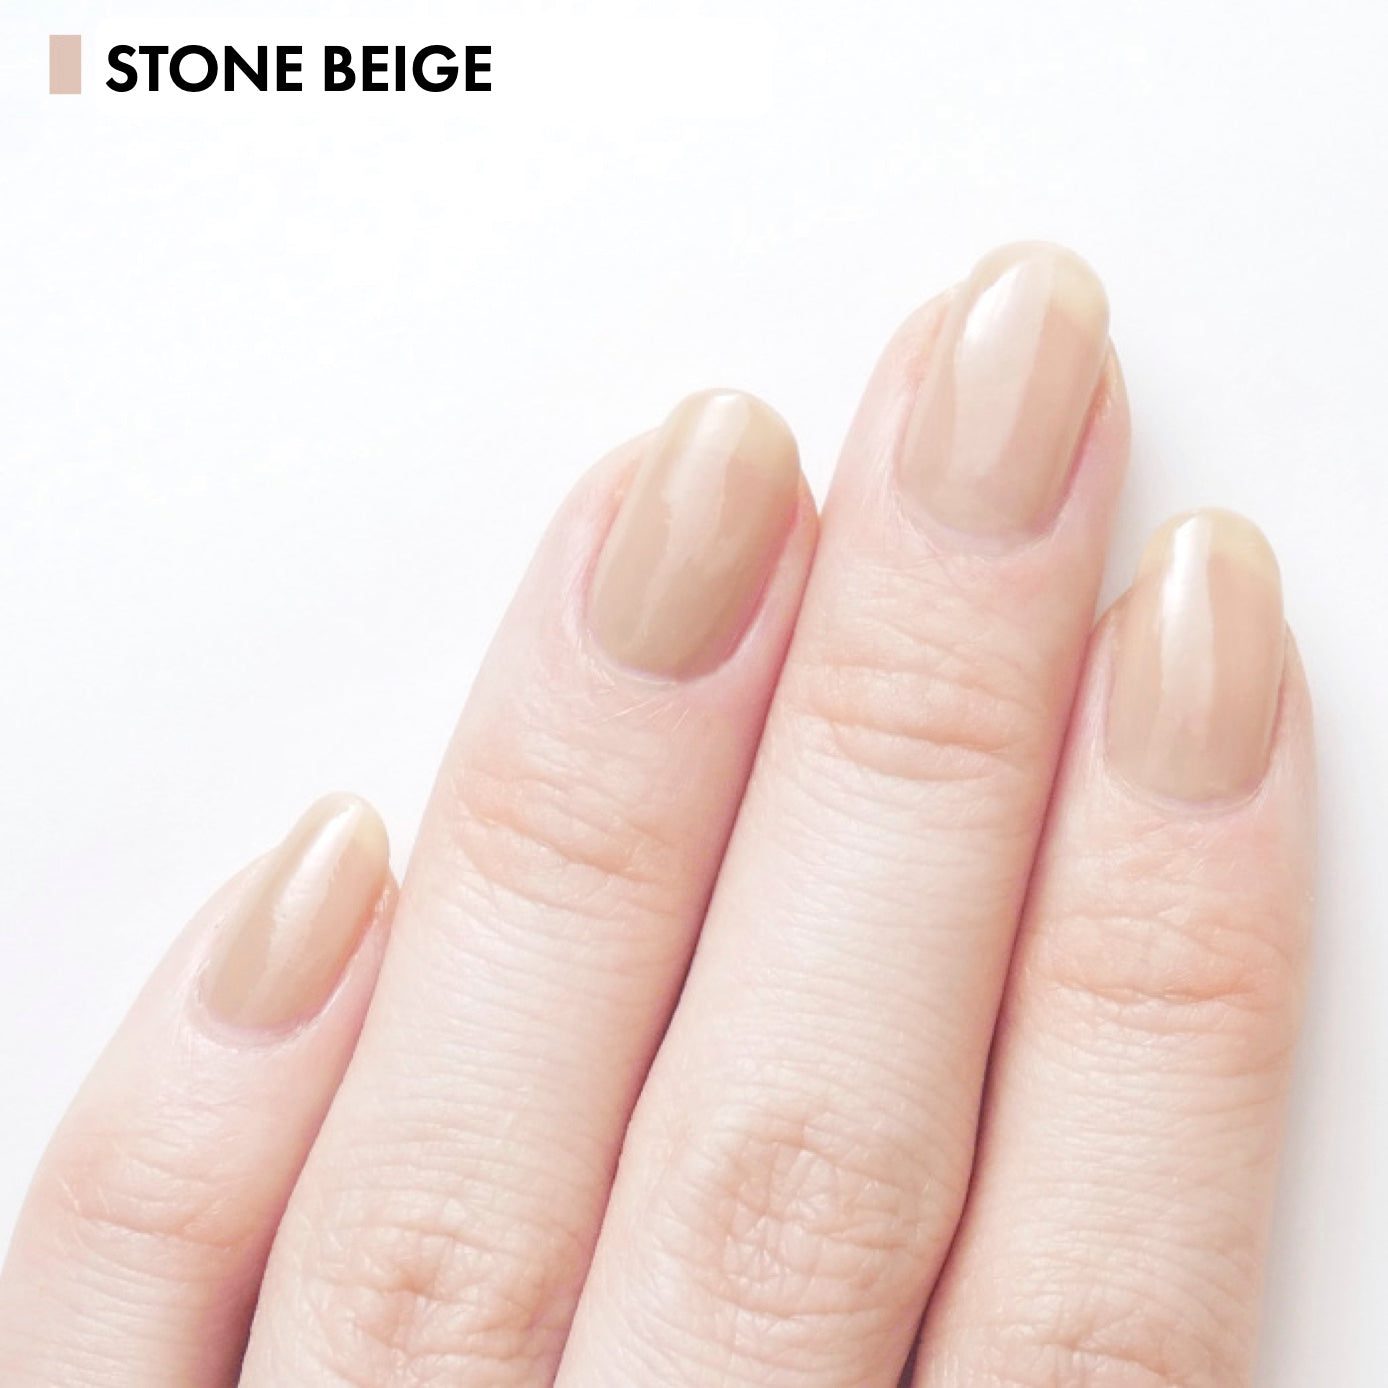 Nail cover hardener nail care polish with stylish nude color "Stone Beige". Branded by HOMEI Weekly Gel. Free from 12 harsh ingredients so we name this 12FREE.